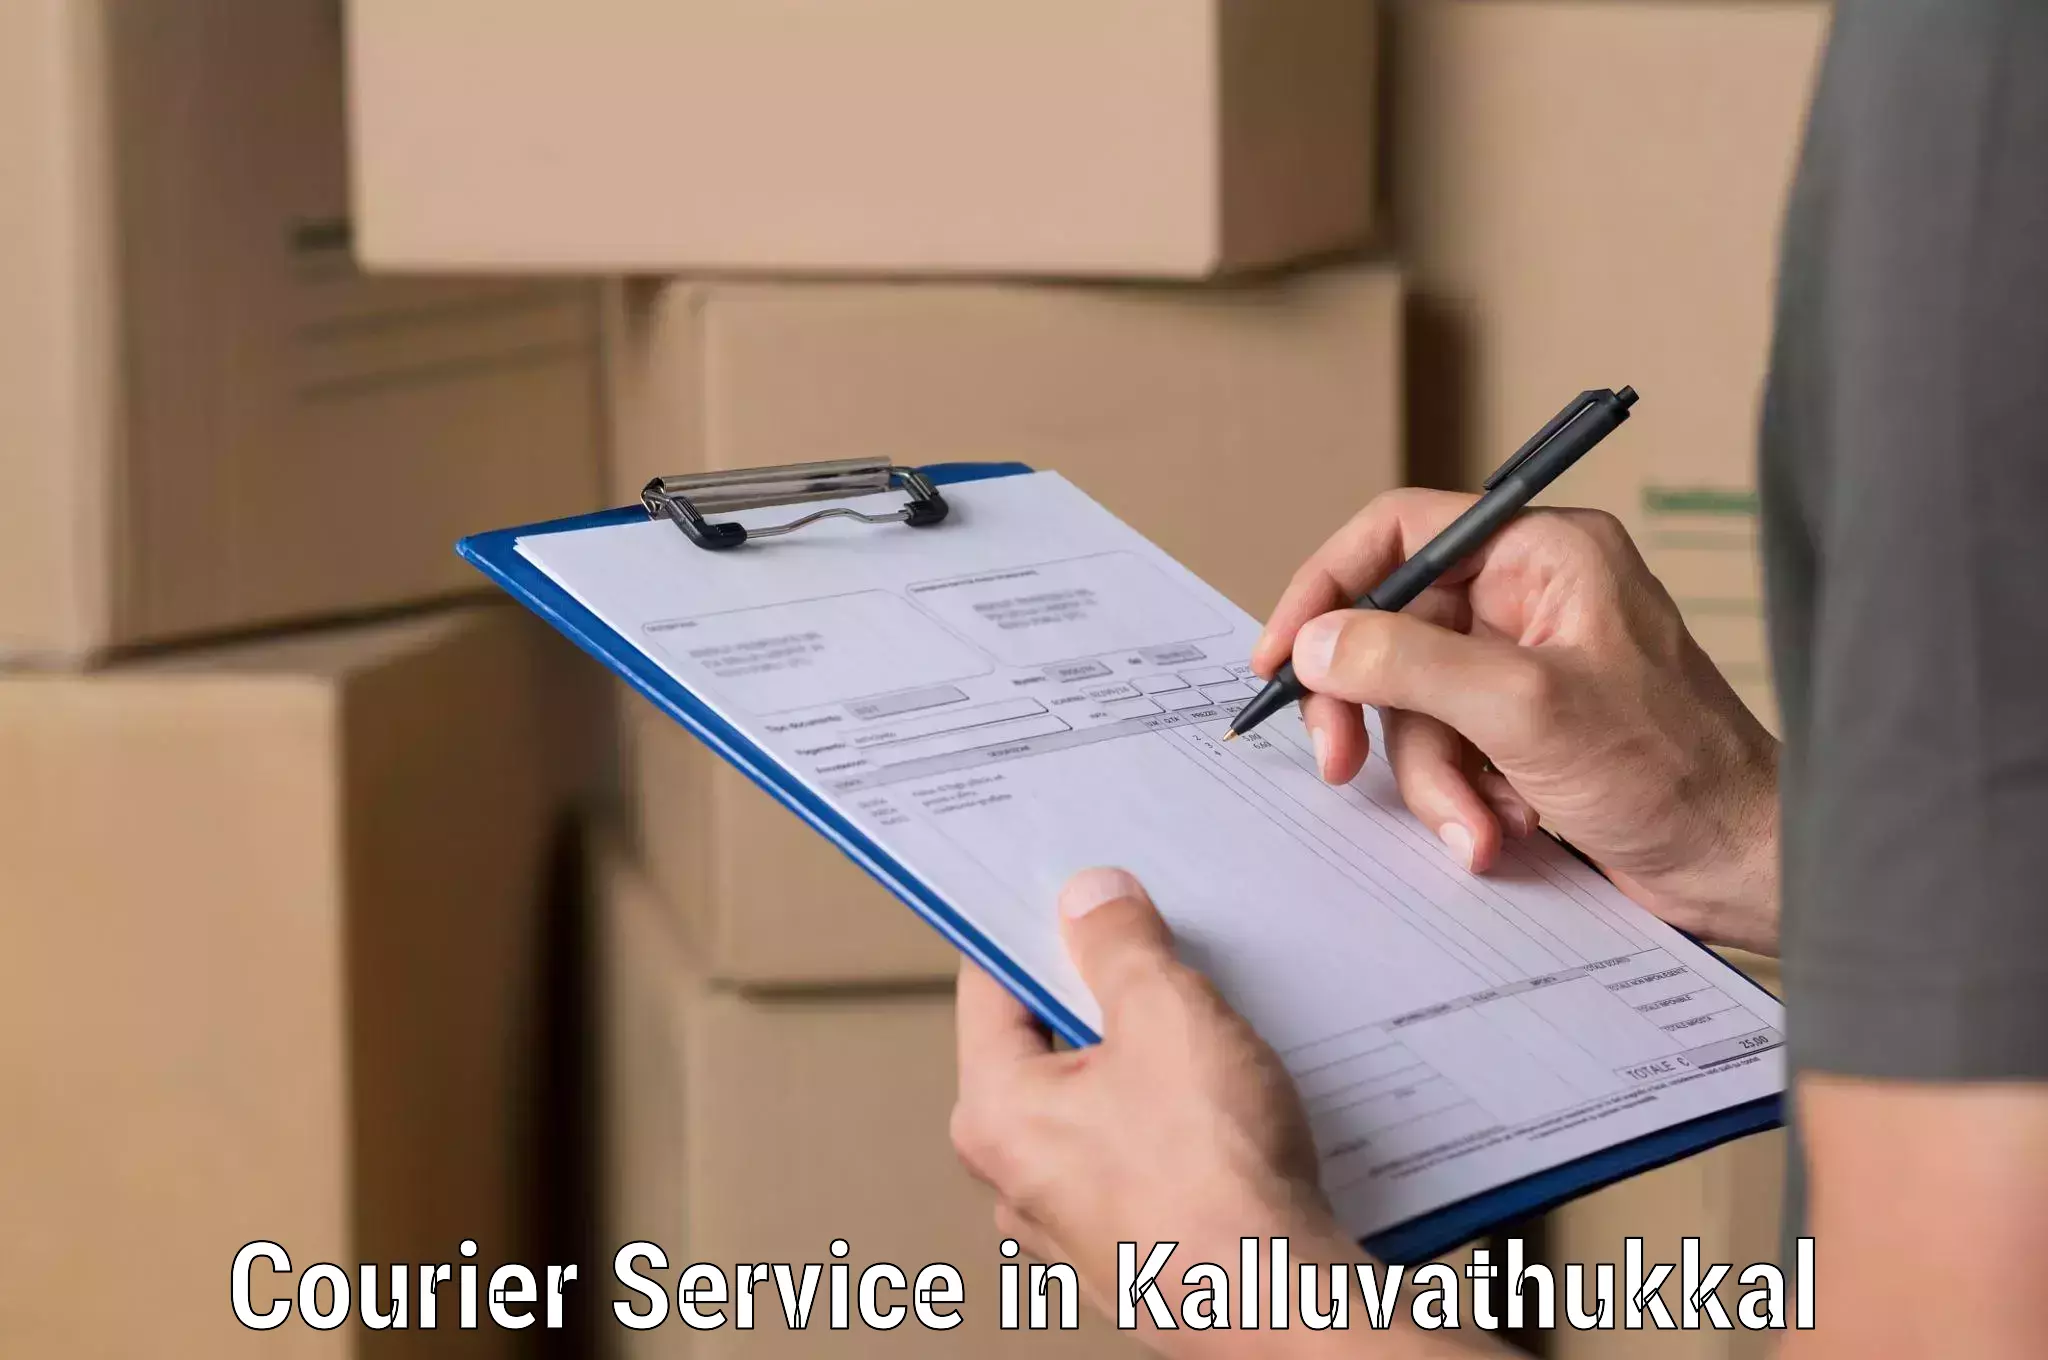 Remote area delivery in Kalluvathukkal